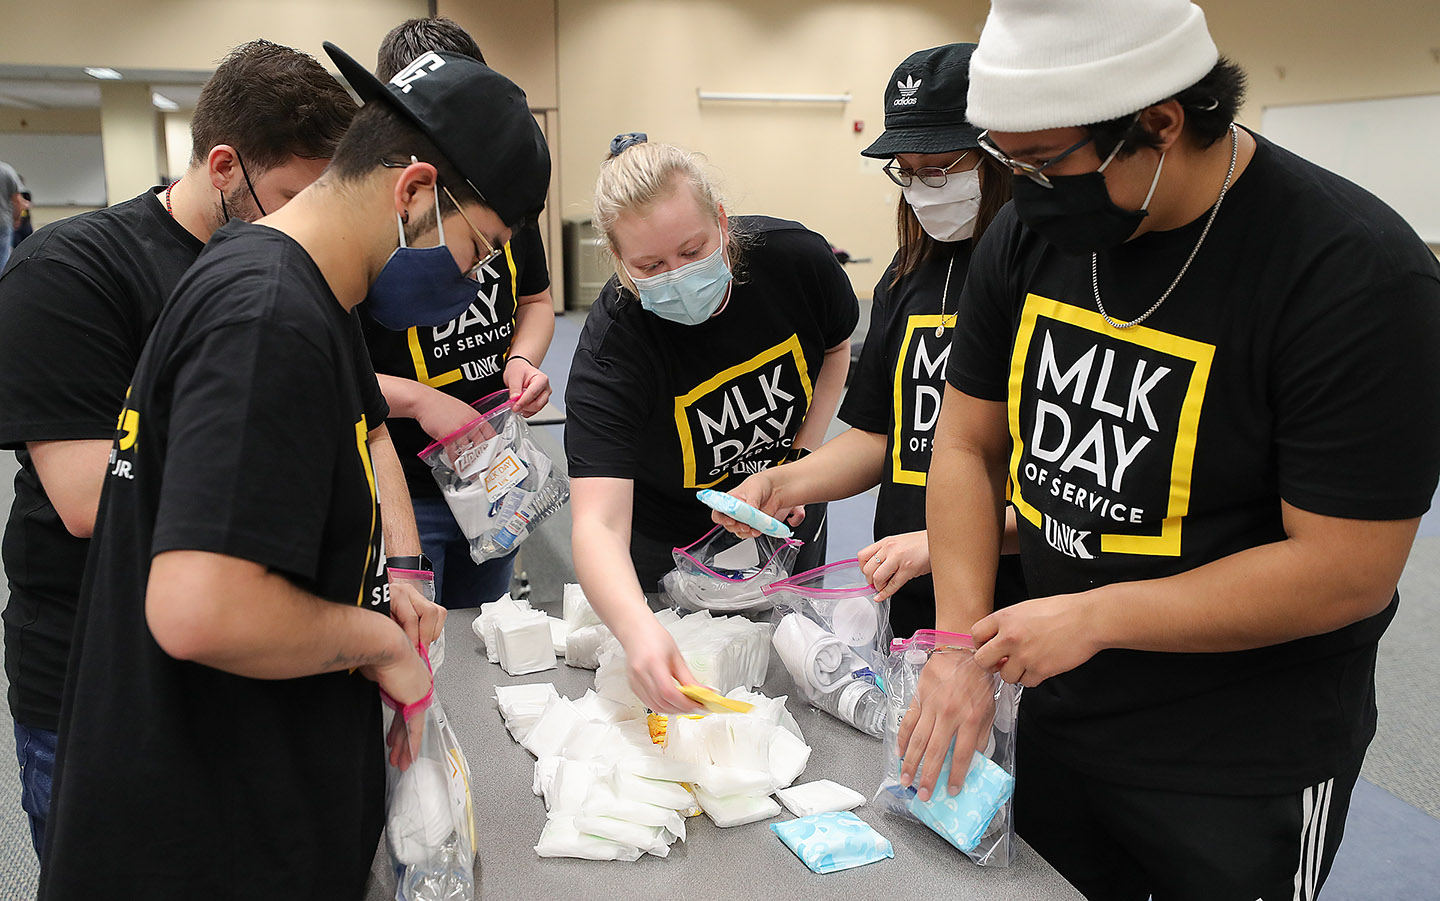 UNK students and employees created 350 personal hygiene care packages for those in need during last year’s MLK Day of Service on campus. This year’s event, which features keynote speaker Ernie Chambers, is scheduled for 11 a.m. to 4 p.m. Thursday in the Nebraskan Student Union.